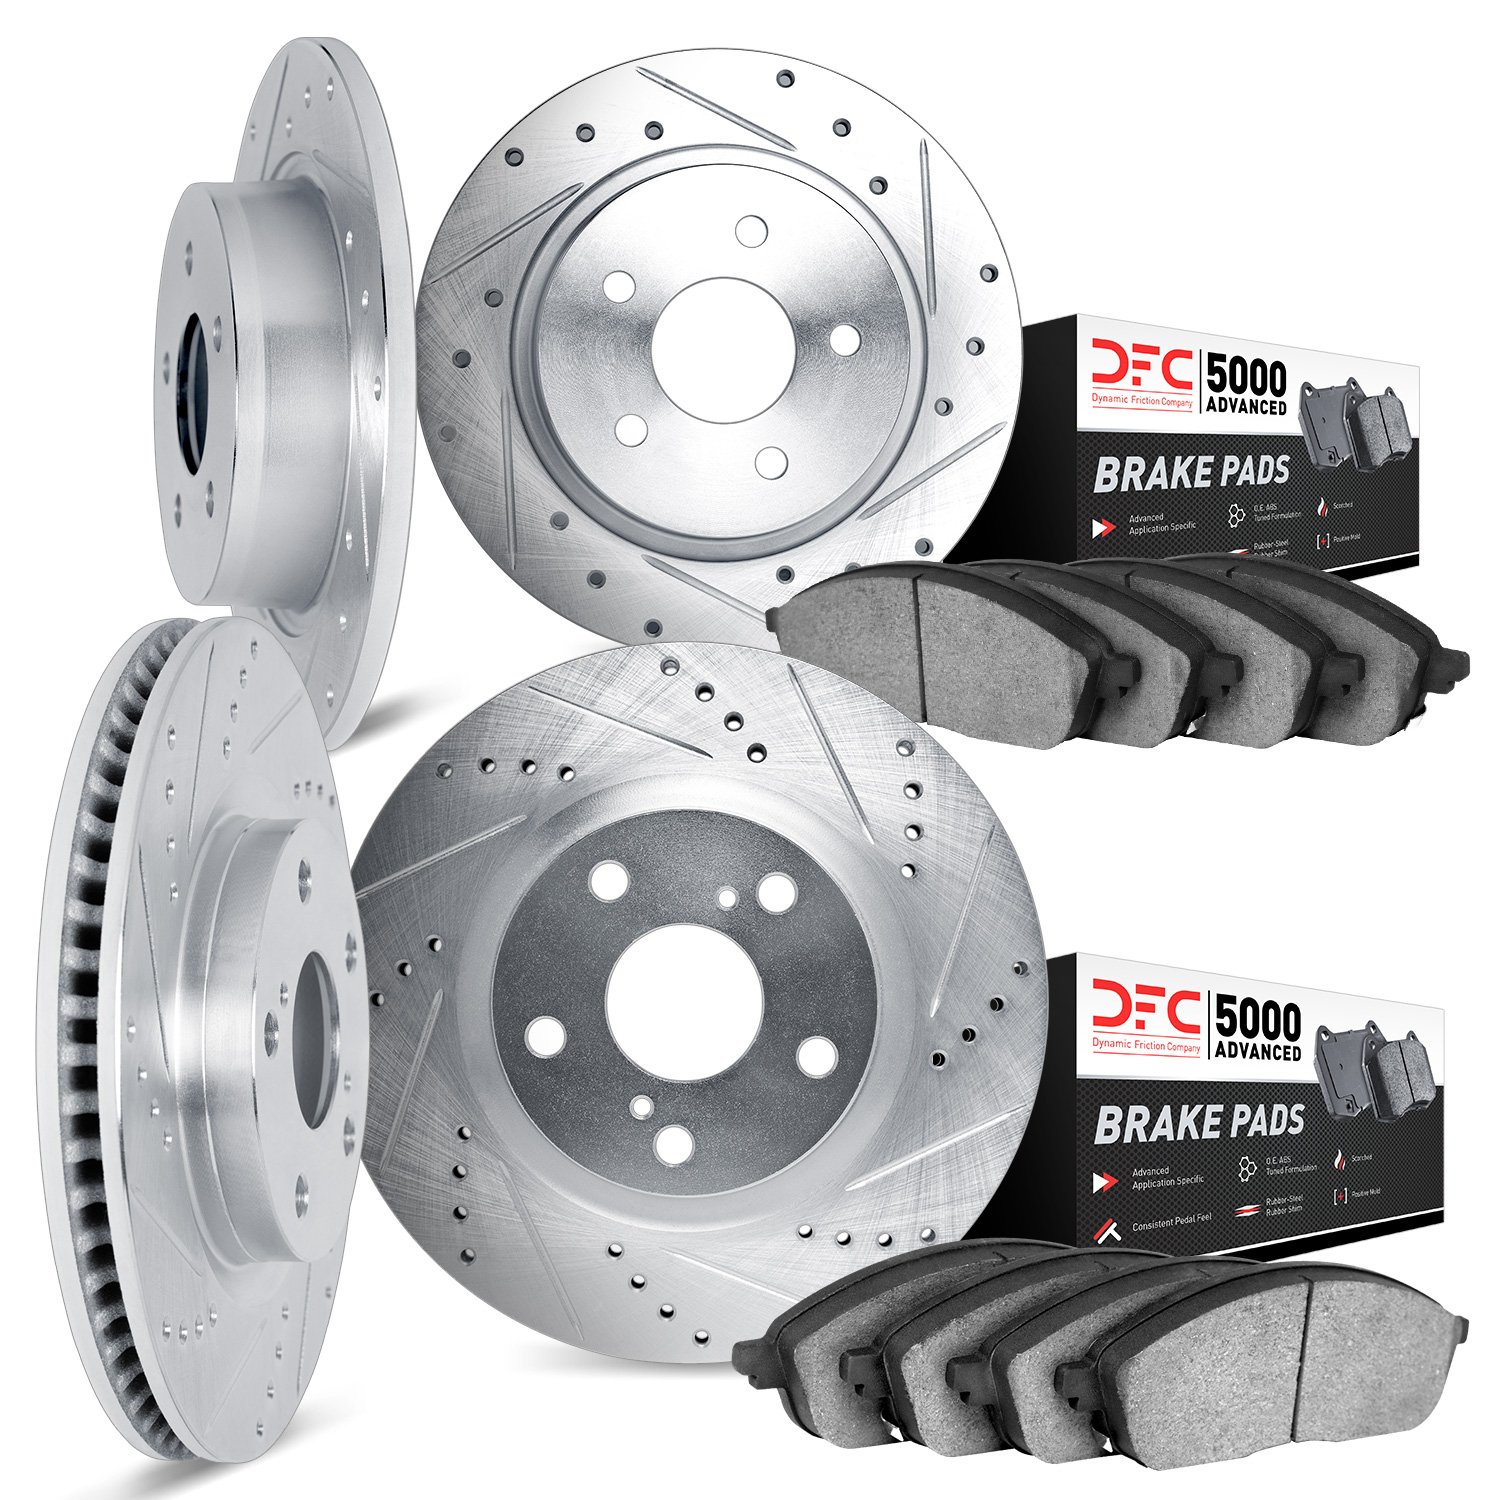 7504-54326 Drilled/Slotted Brake Rotors w/5000 Advanced Brake Pads Kit [Silver], 1997-2000 Ford/Lincoln/Mercury/Mazda, Position: